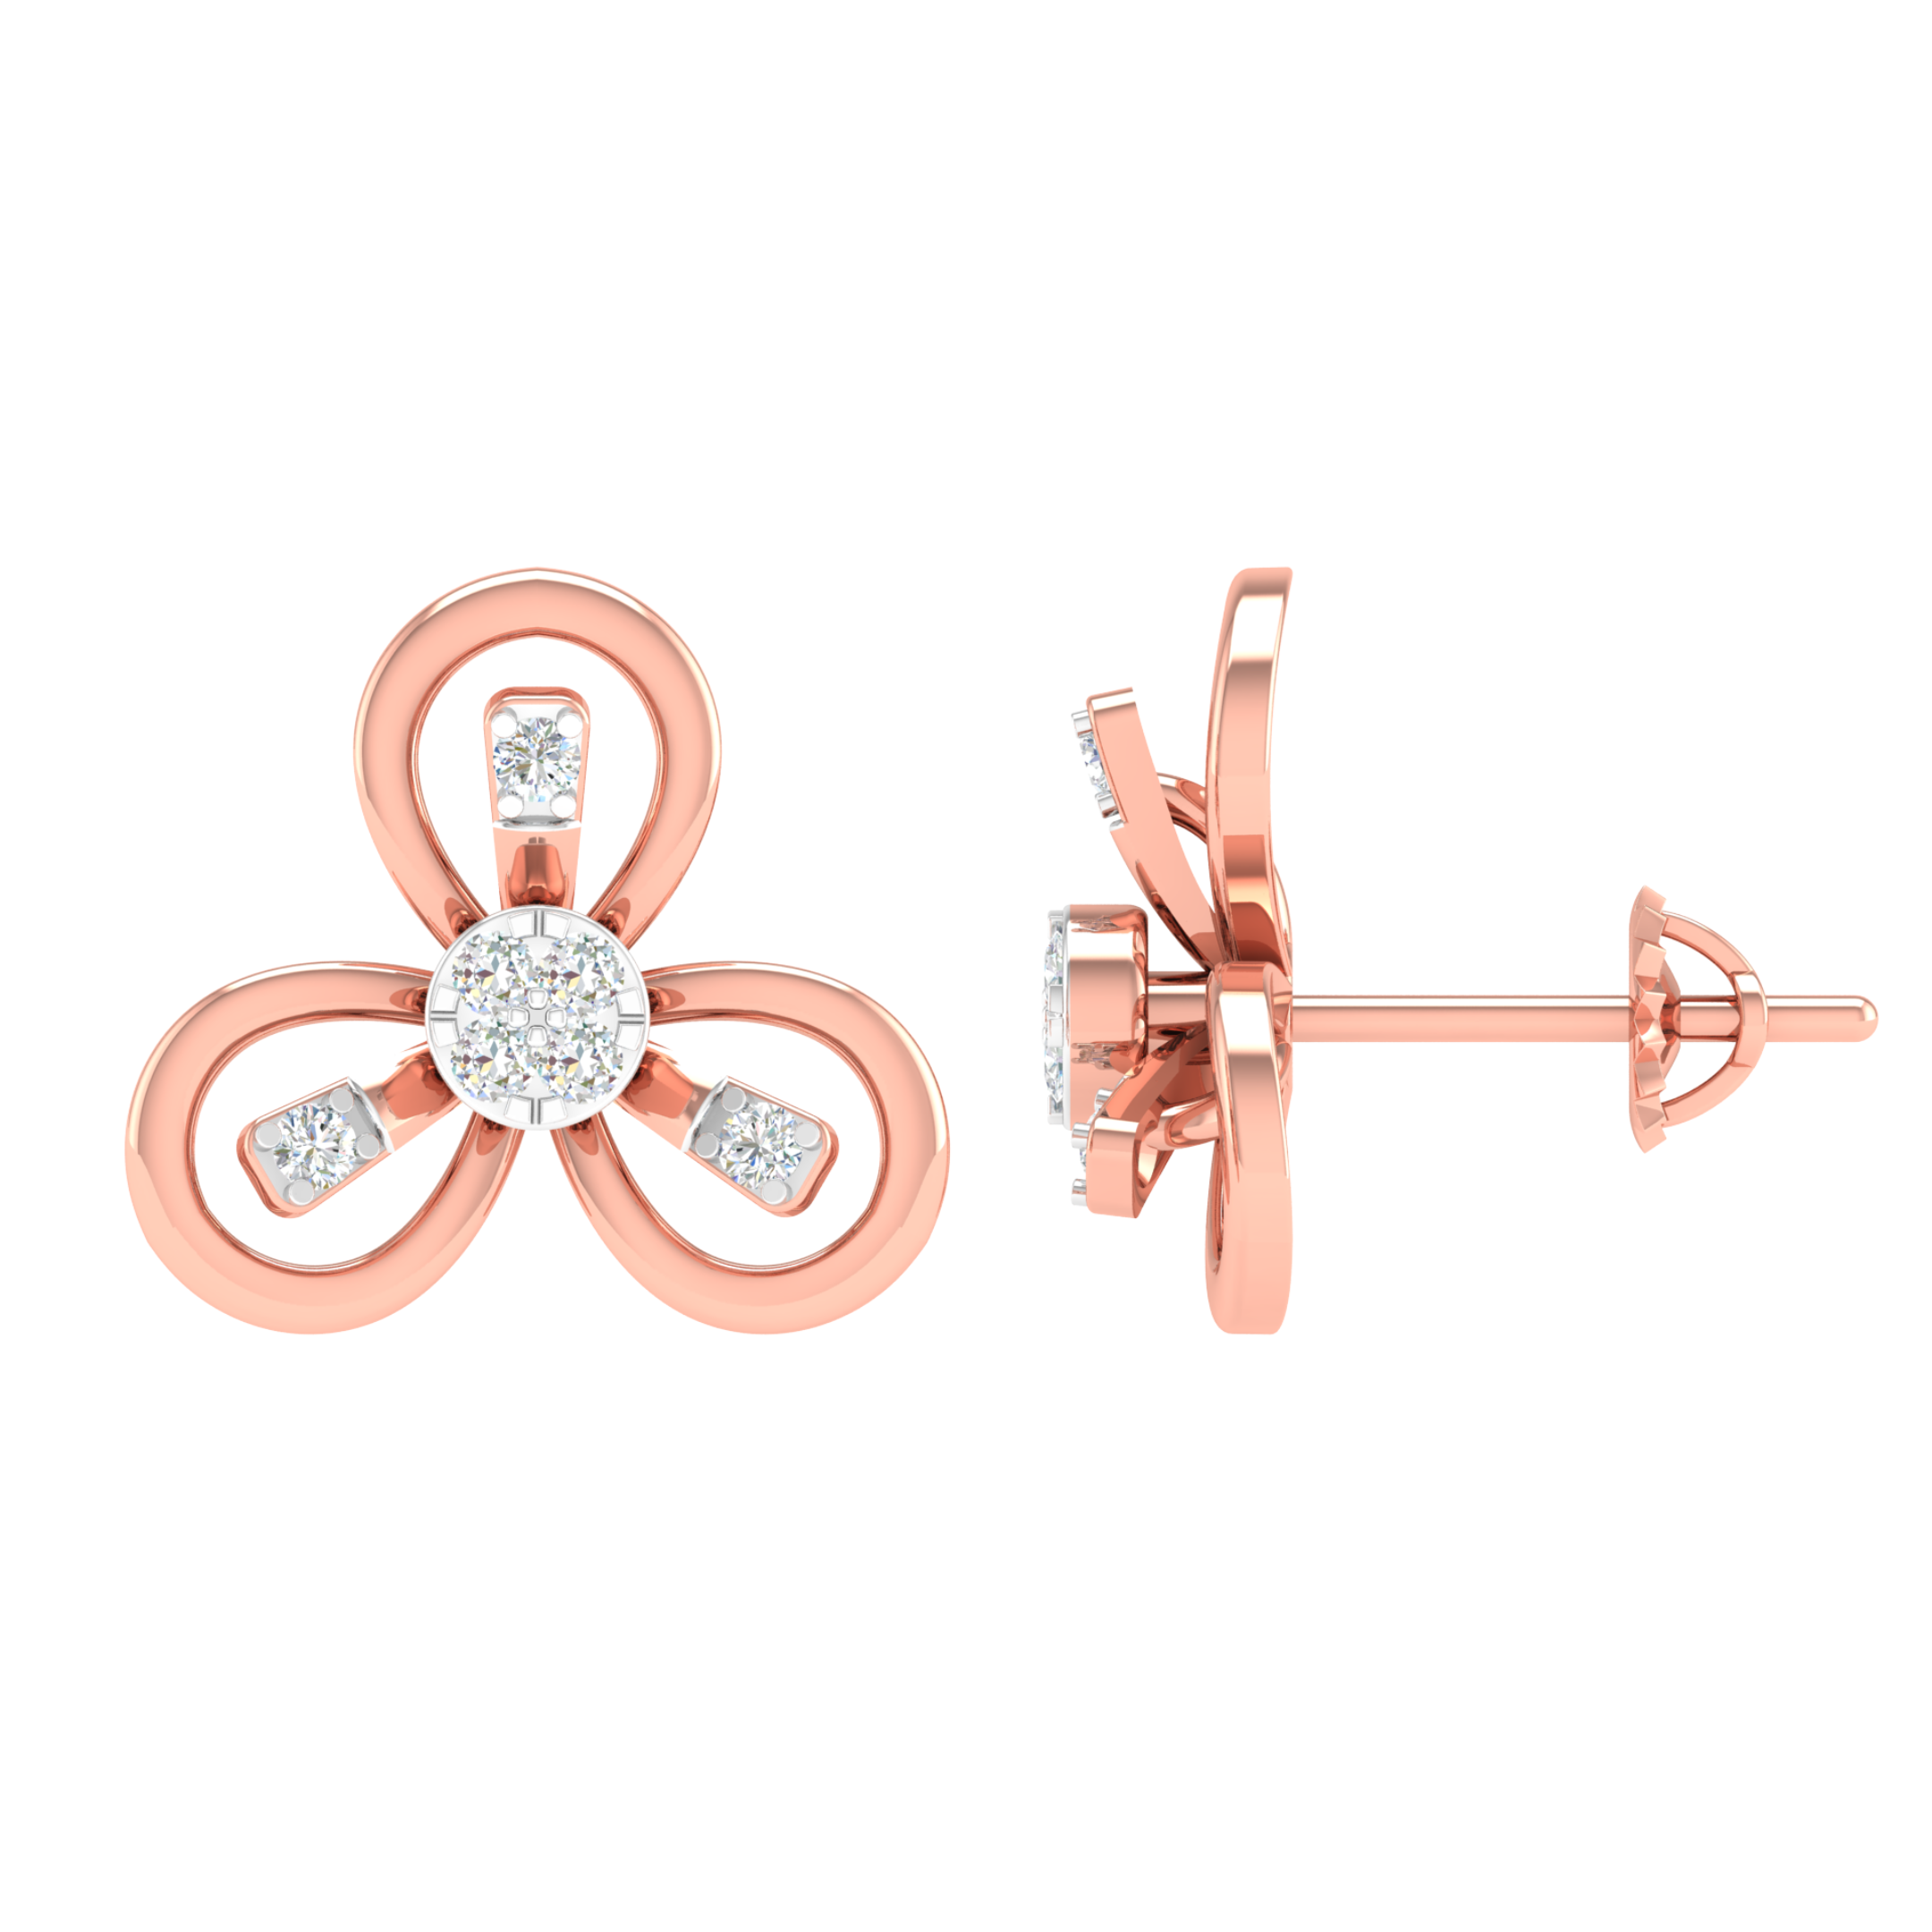 18KT ROSE GOLD FLAX REAL DIAMOND EARRINGS